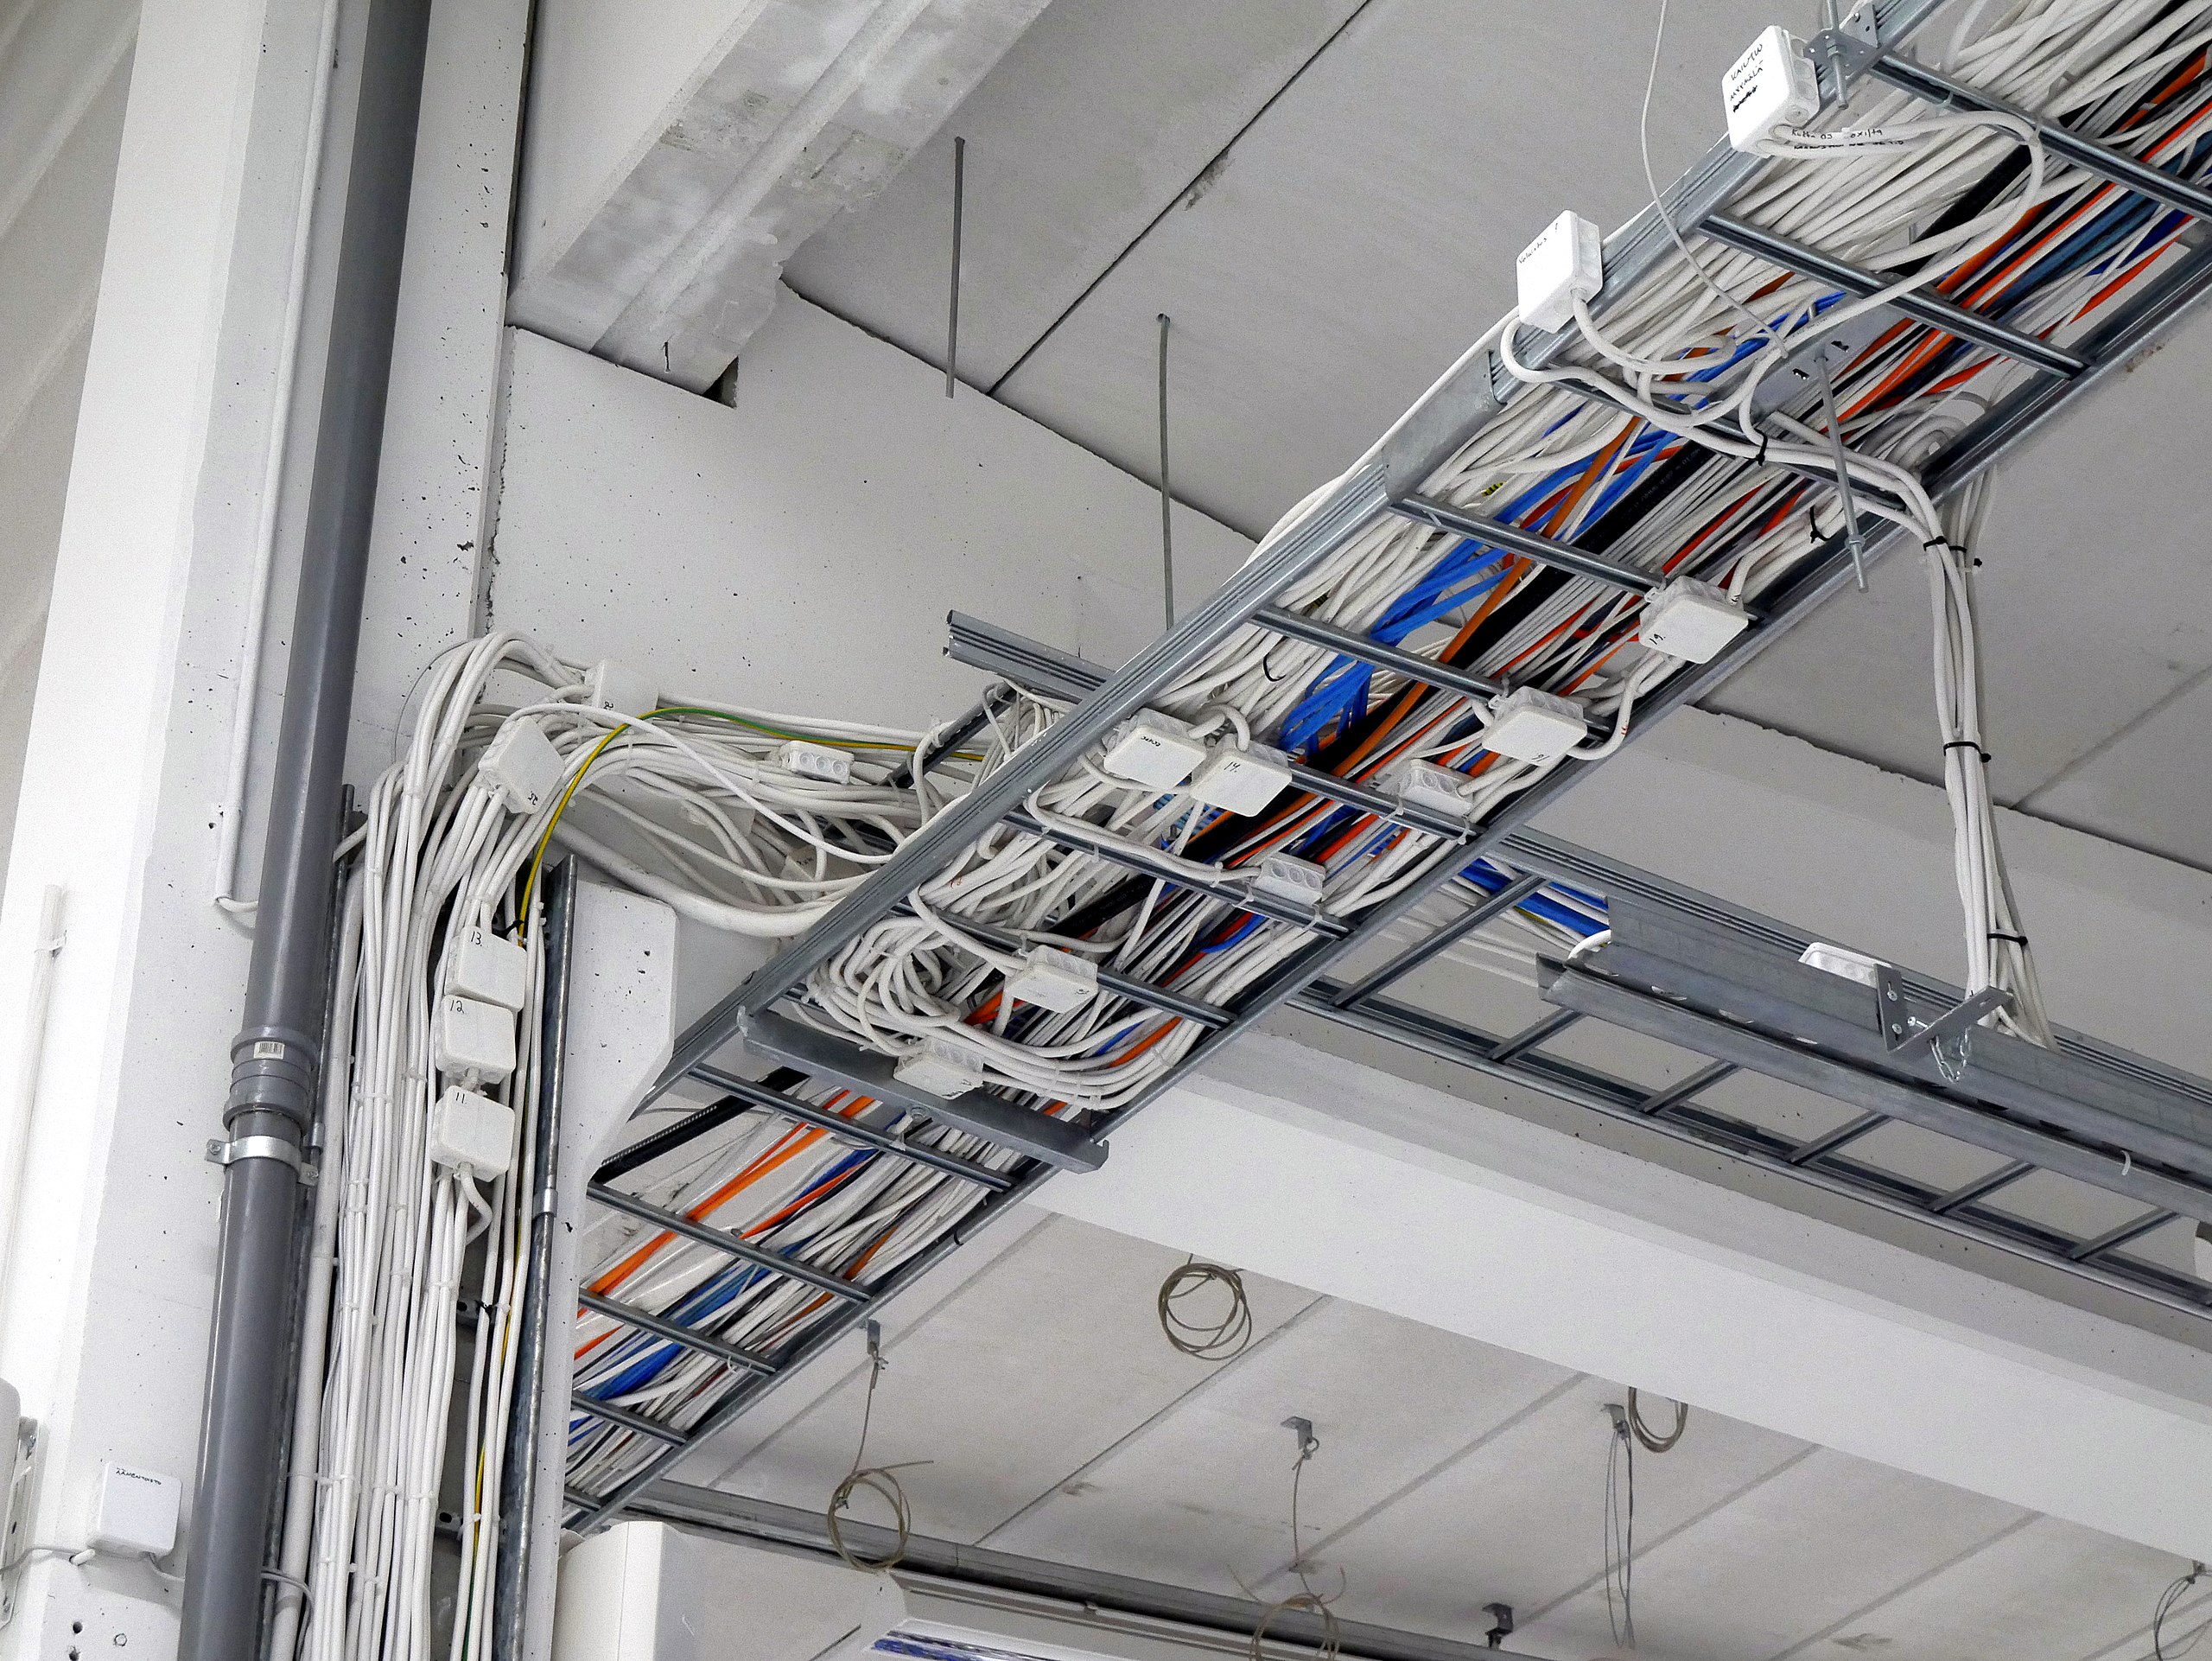 Understanding cable trays